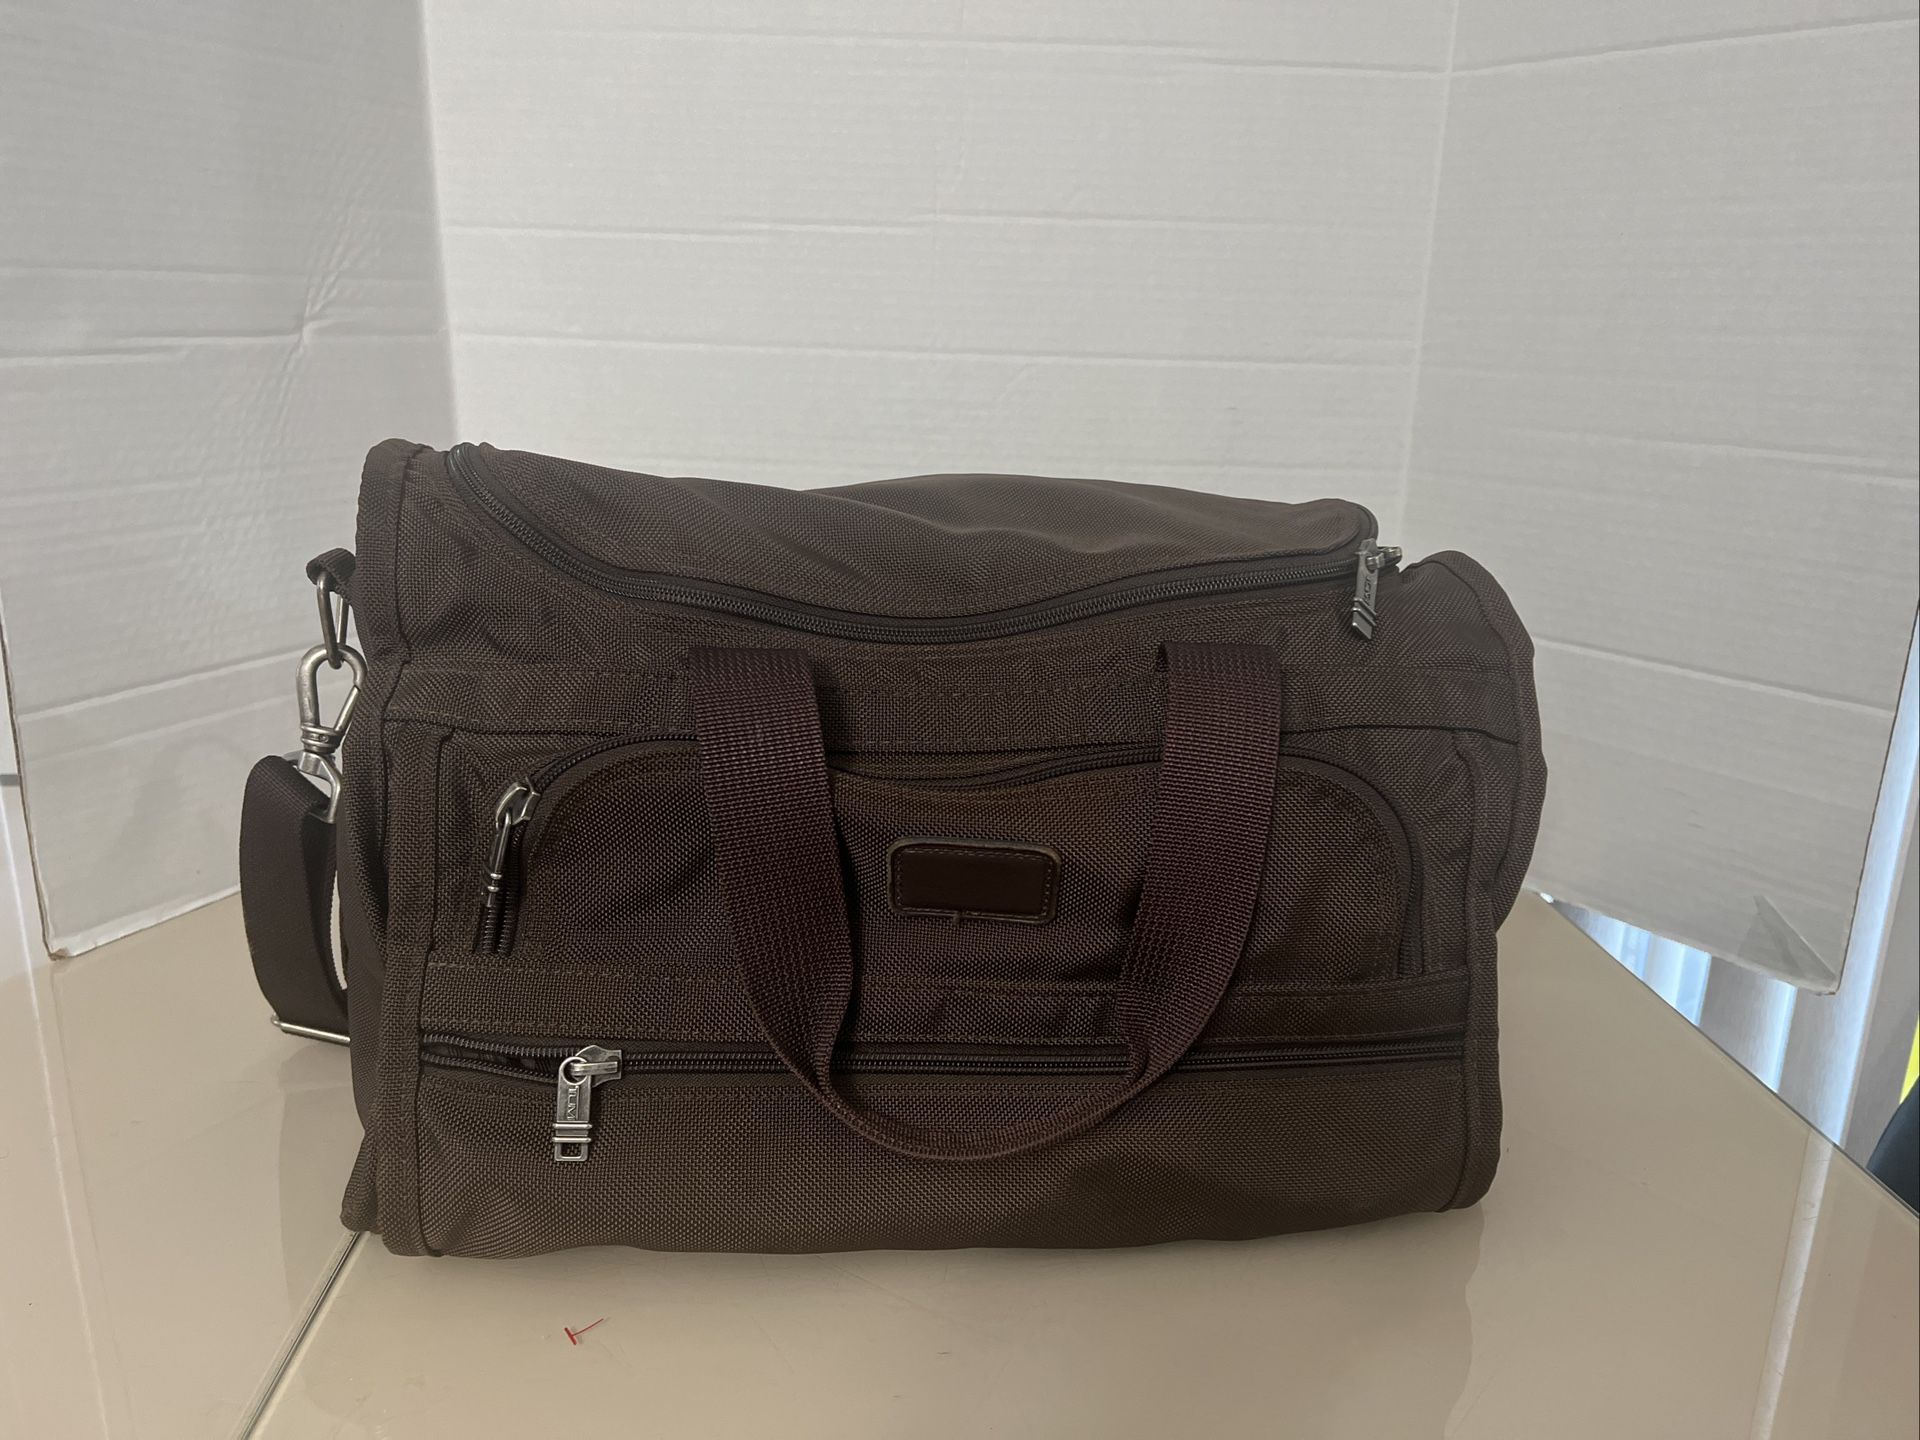 TUMI Brown Carry On Messenger Bag With Shoulder Strap USA Excellent Condition. The bag has been very gently used and in very good condition. It’s choc